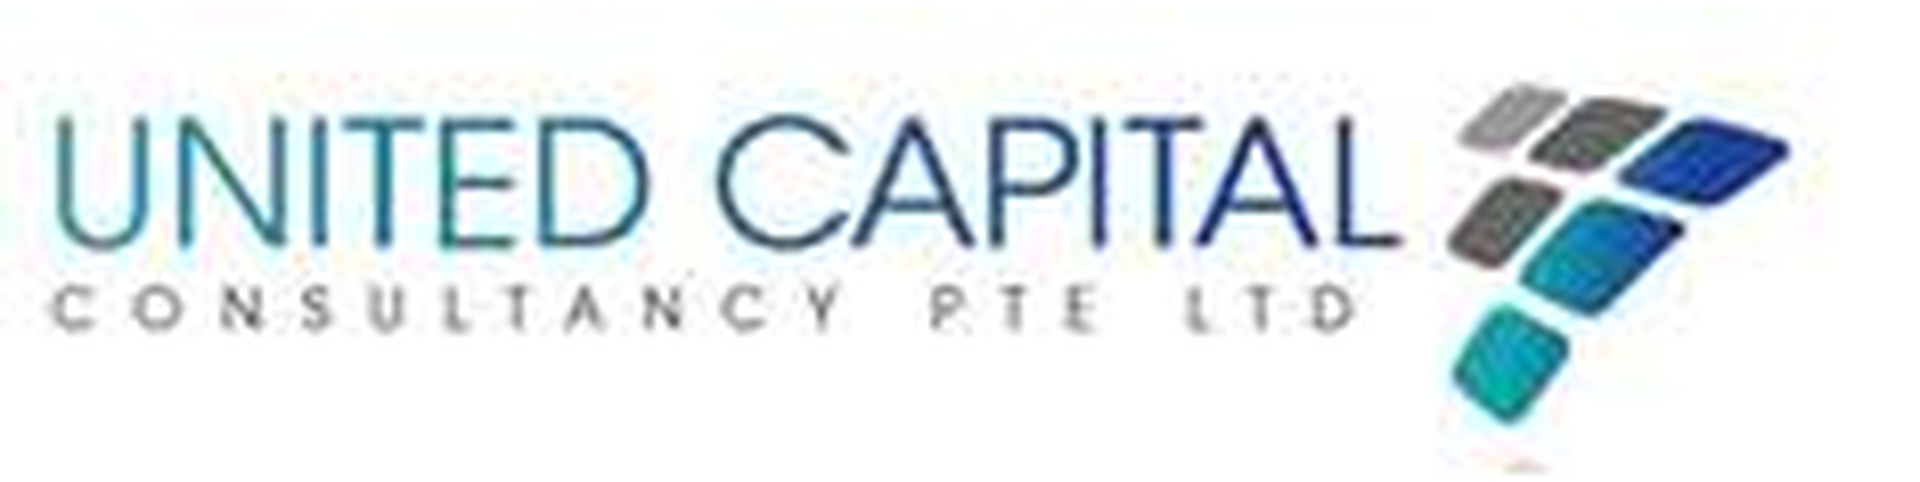 United Capital Consultancy Pte Ltd is hiring a Software Engineer